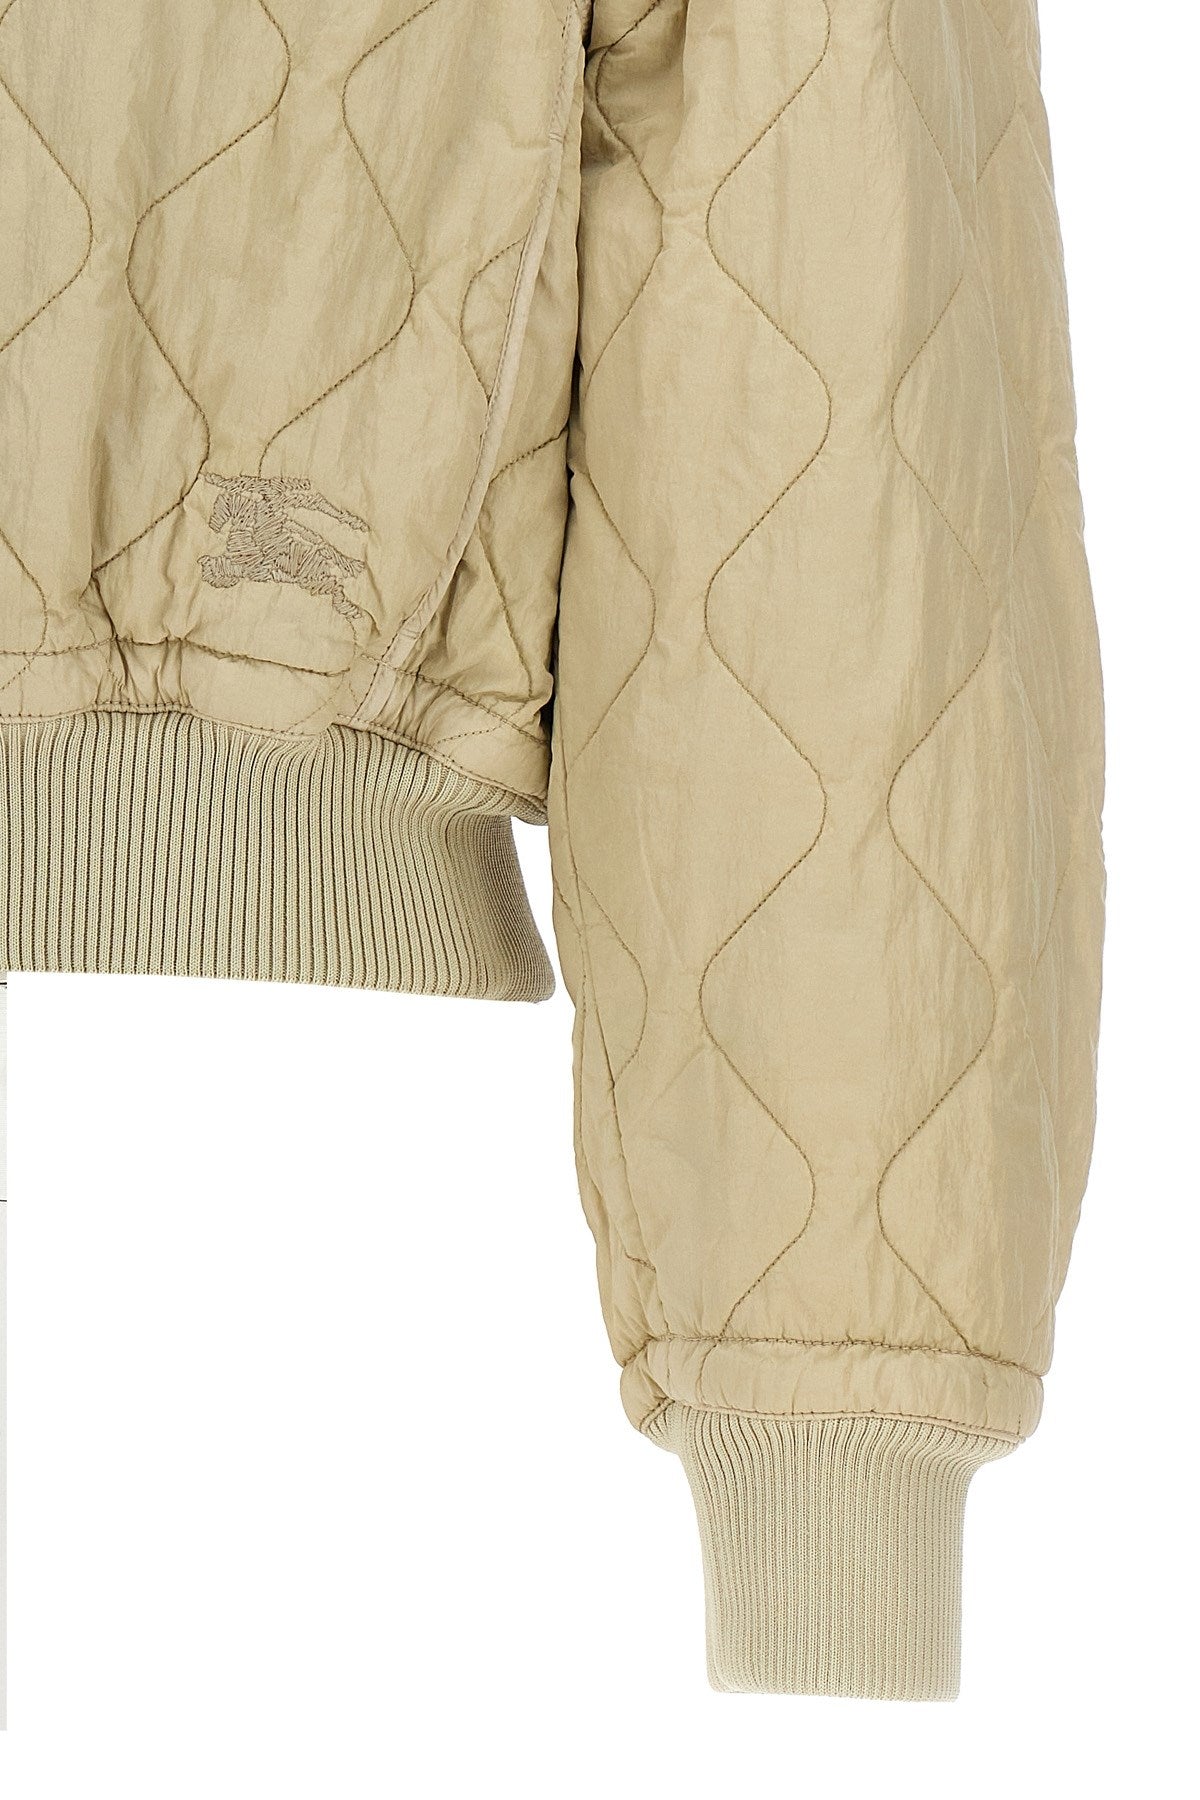 Burberry Women Quilted Bomber Jacket